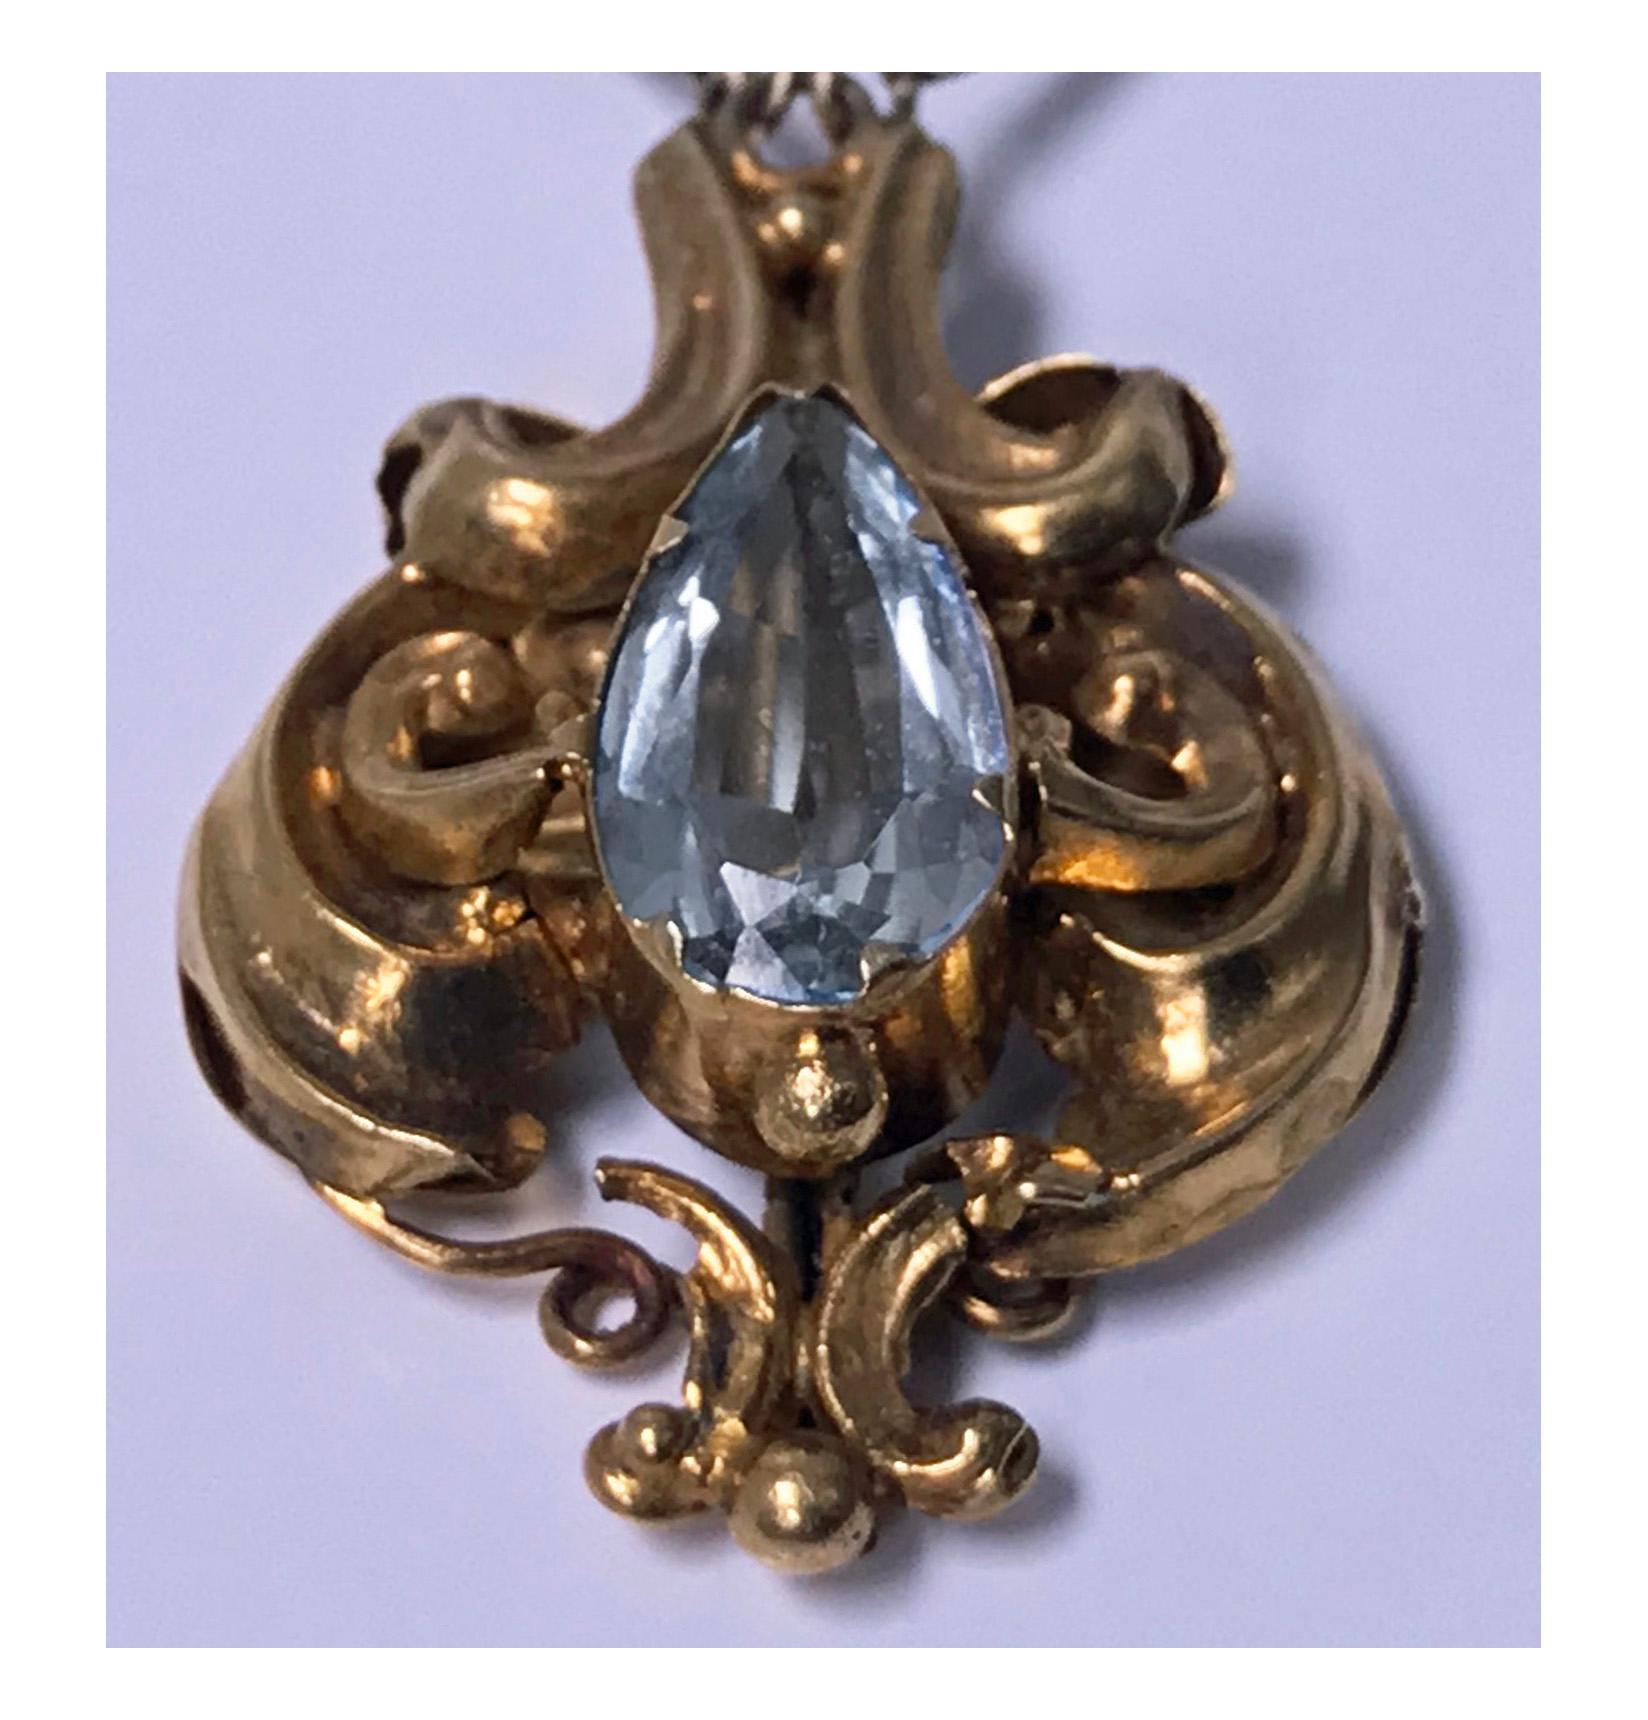 Antique 15-karat aquamarine brooch, English, circa 1840. The open scroll foliate design upper section set with five oval facetted aquamarines, suspending scroll foliate drop pendant section set with a tear drop aquamarine, chain sections attached.